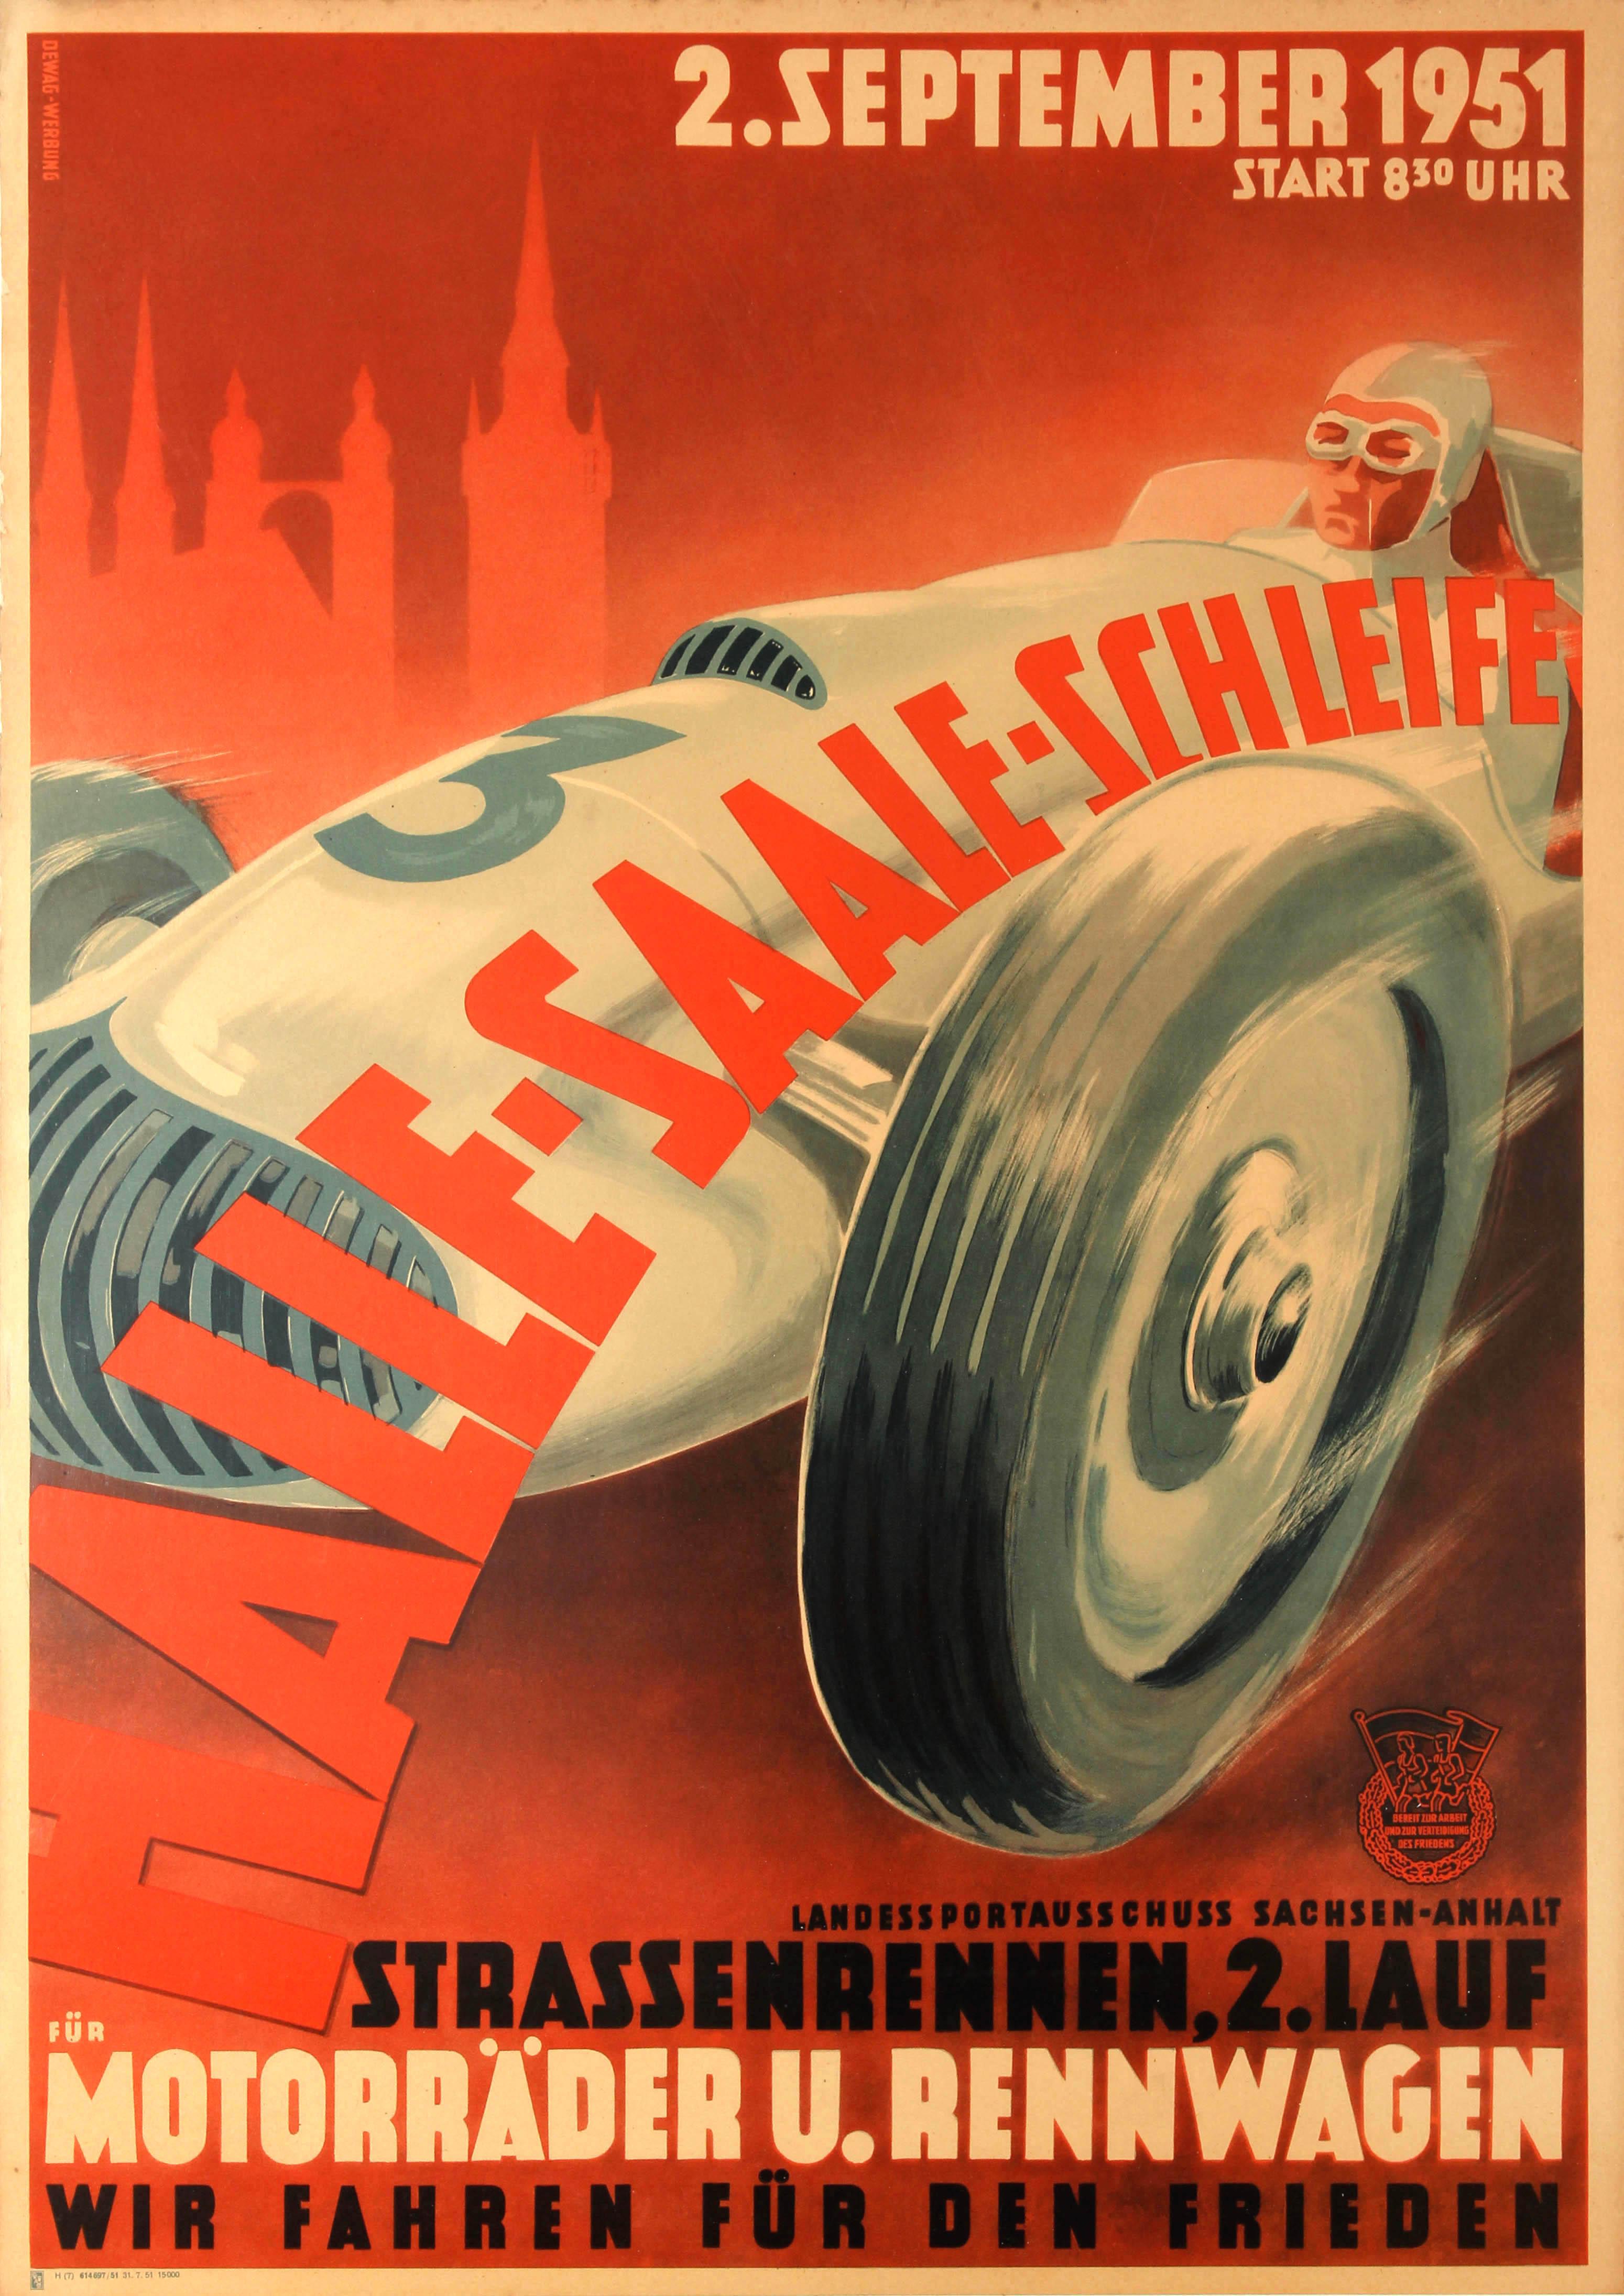 Unknown Print - Original Vintage Motor Car Racing Event Poster For The 1951 Halle Saale Schleife